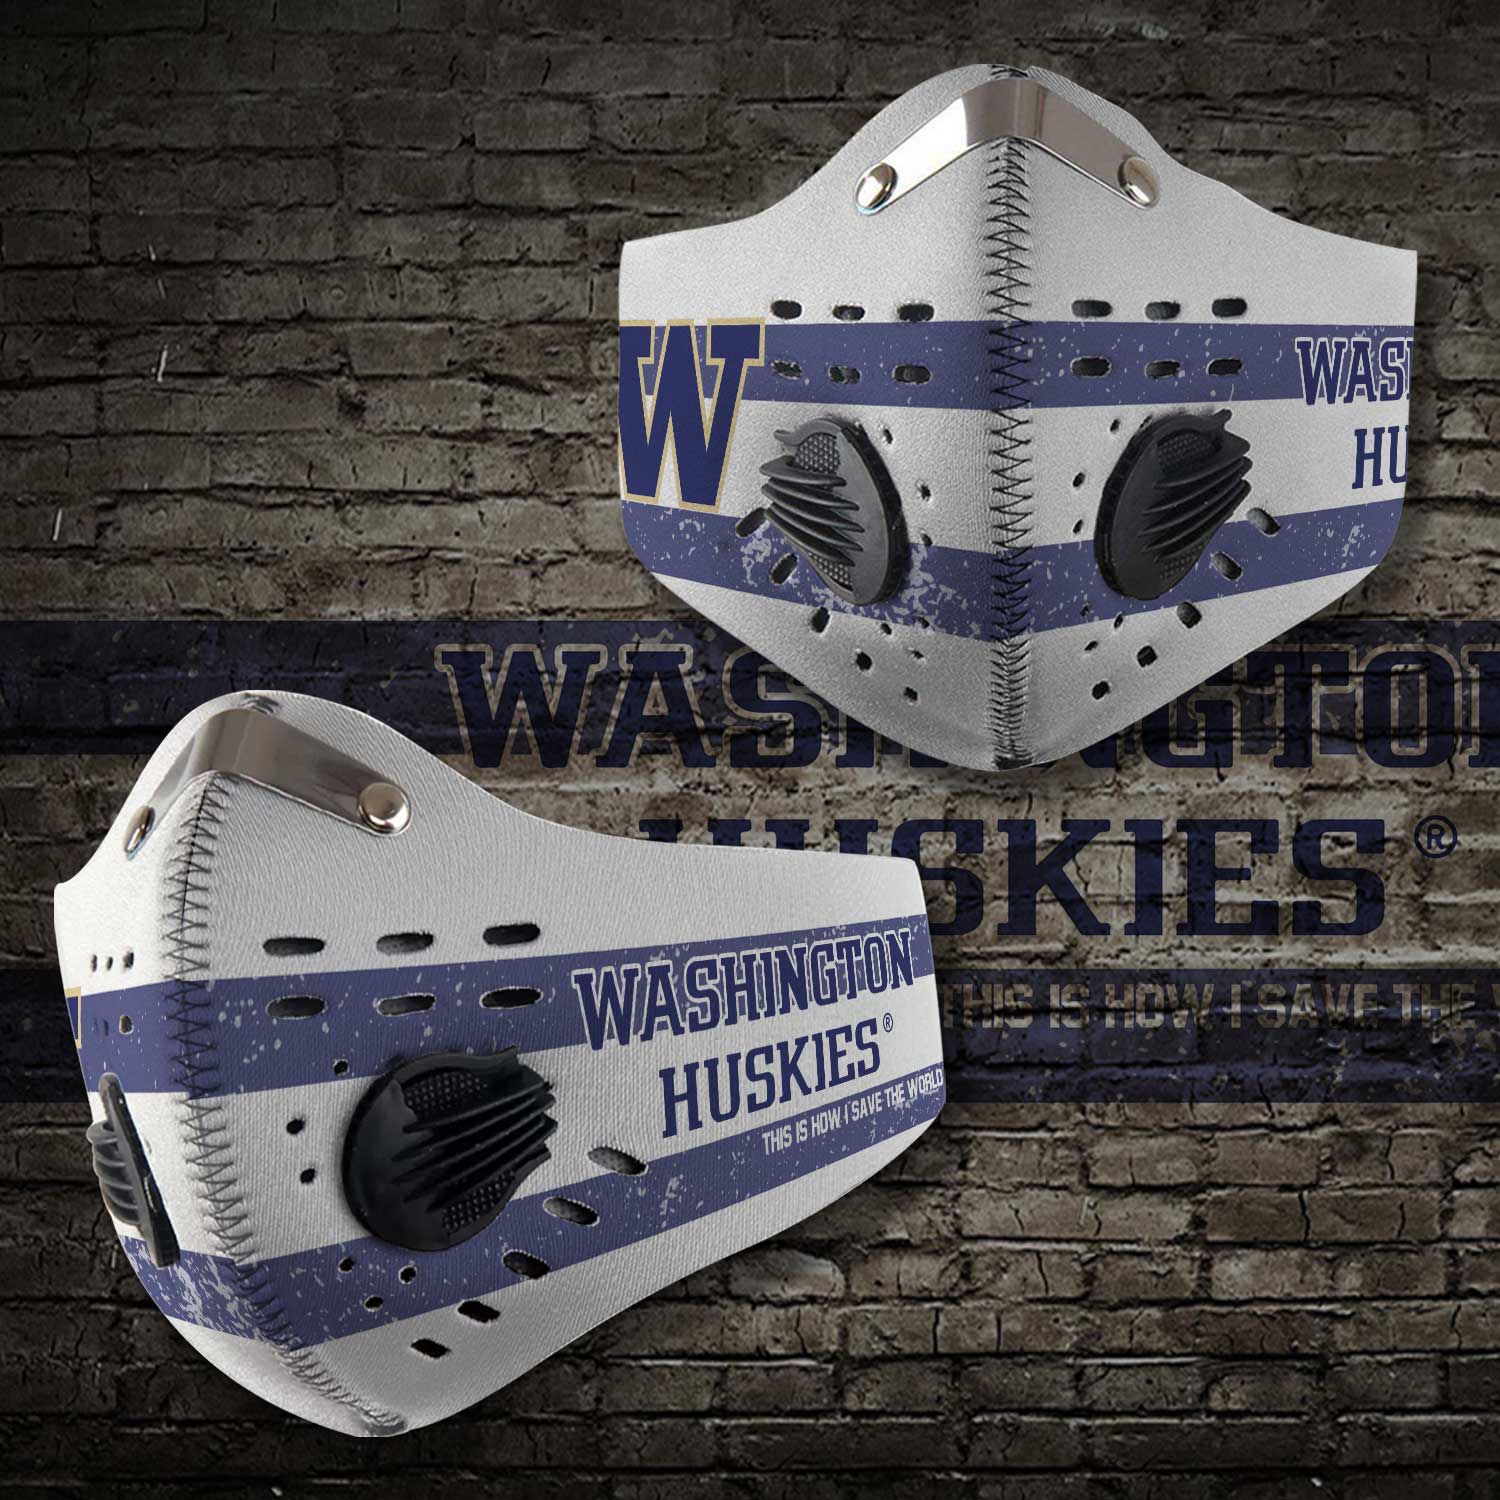 Washington huskies this is how i save the world carbon filter face mask 1